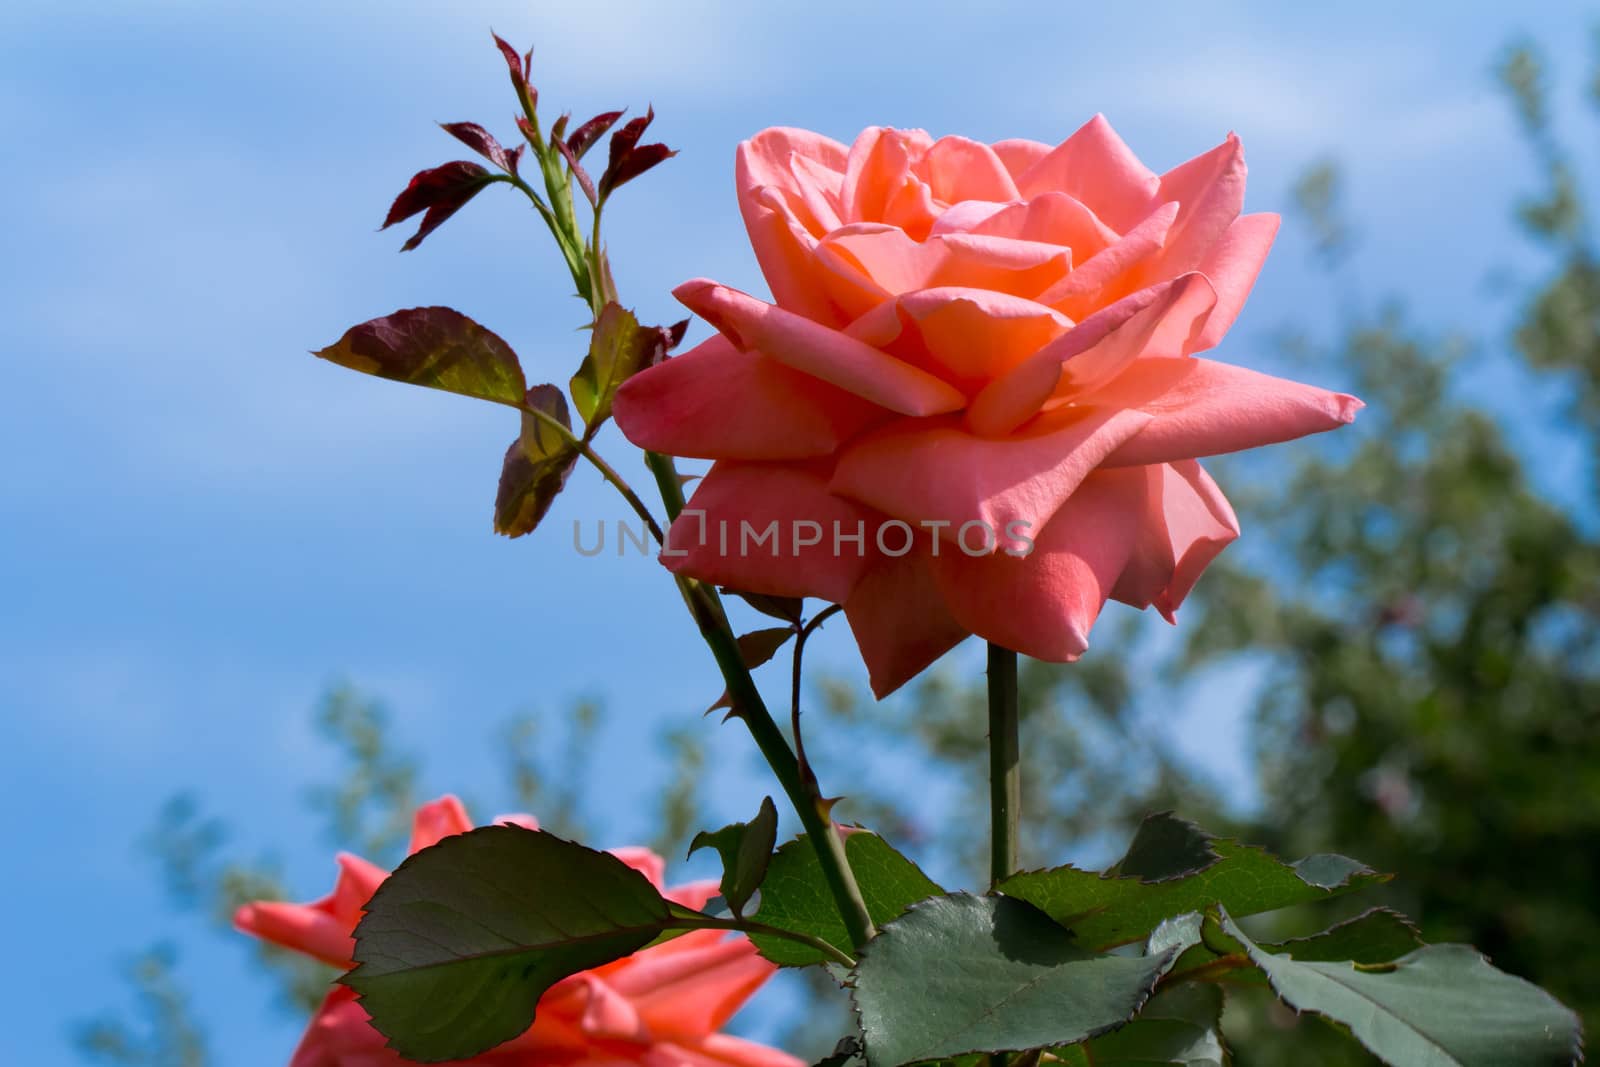 Hot pink largest flower garden rose photographed on the background of blue sky.